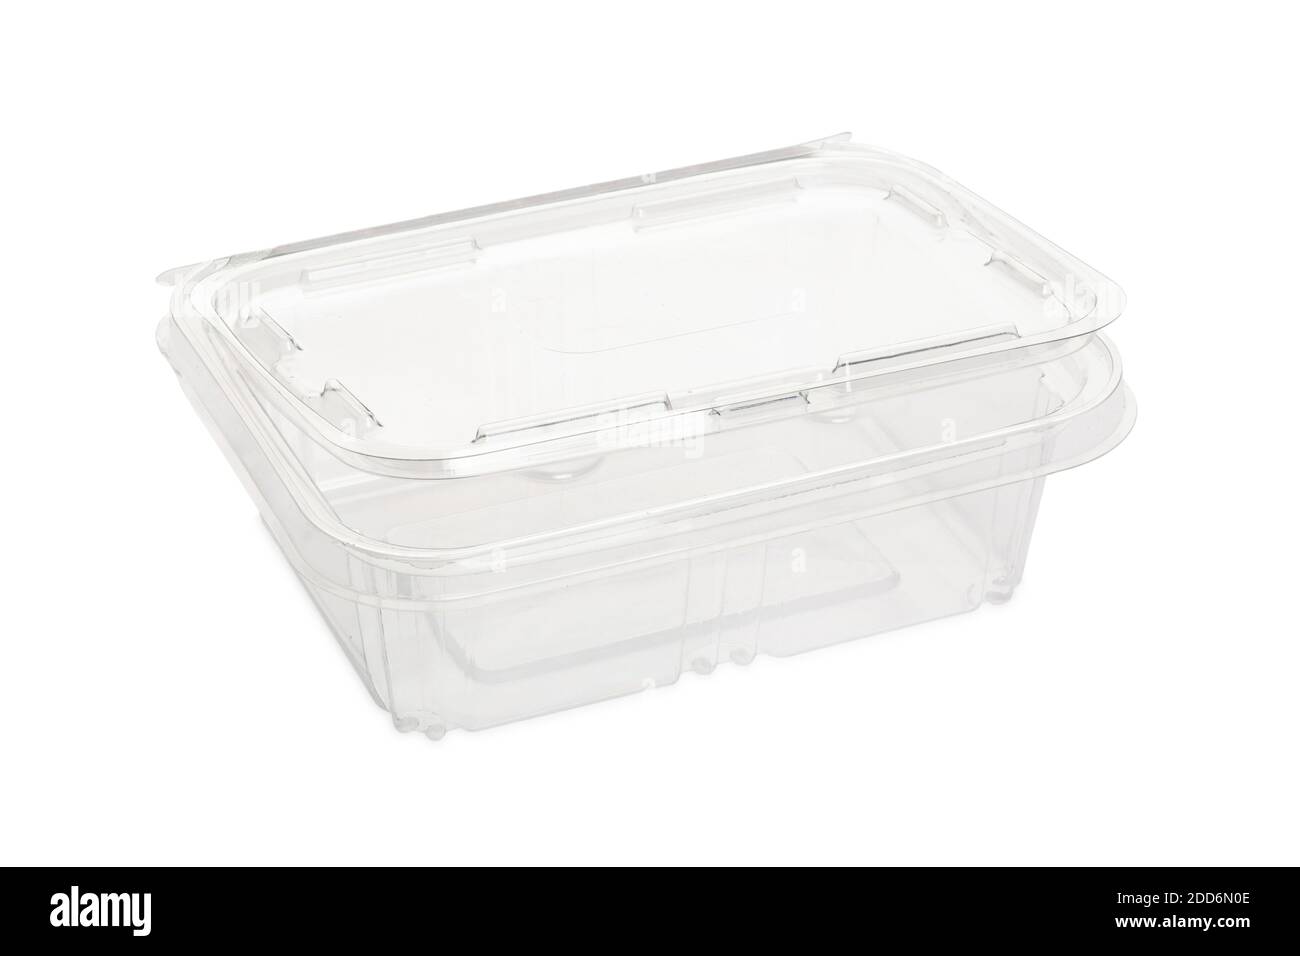 https://c8.alamy.com/comp/2DD6N0E/disposable-plastic-transparent-lunch-box-isolated-on-white-background-2DD6N0E.jpg